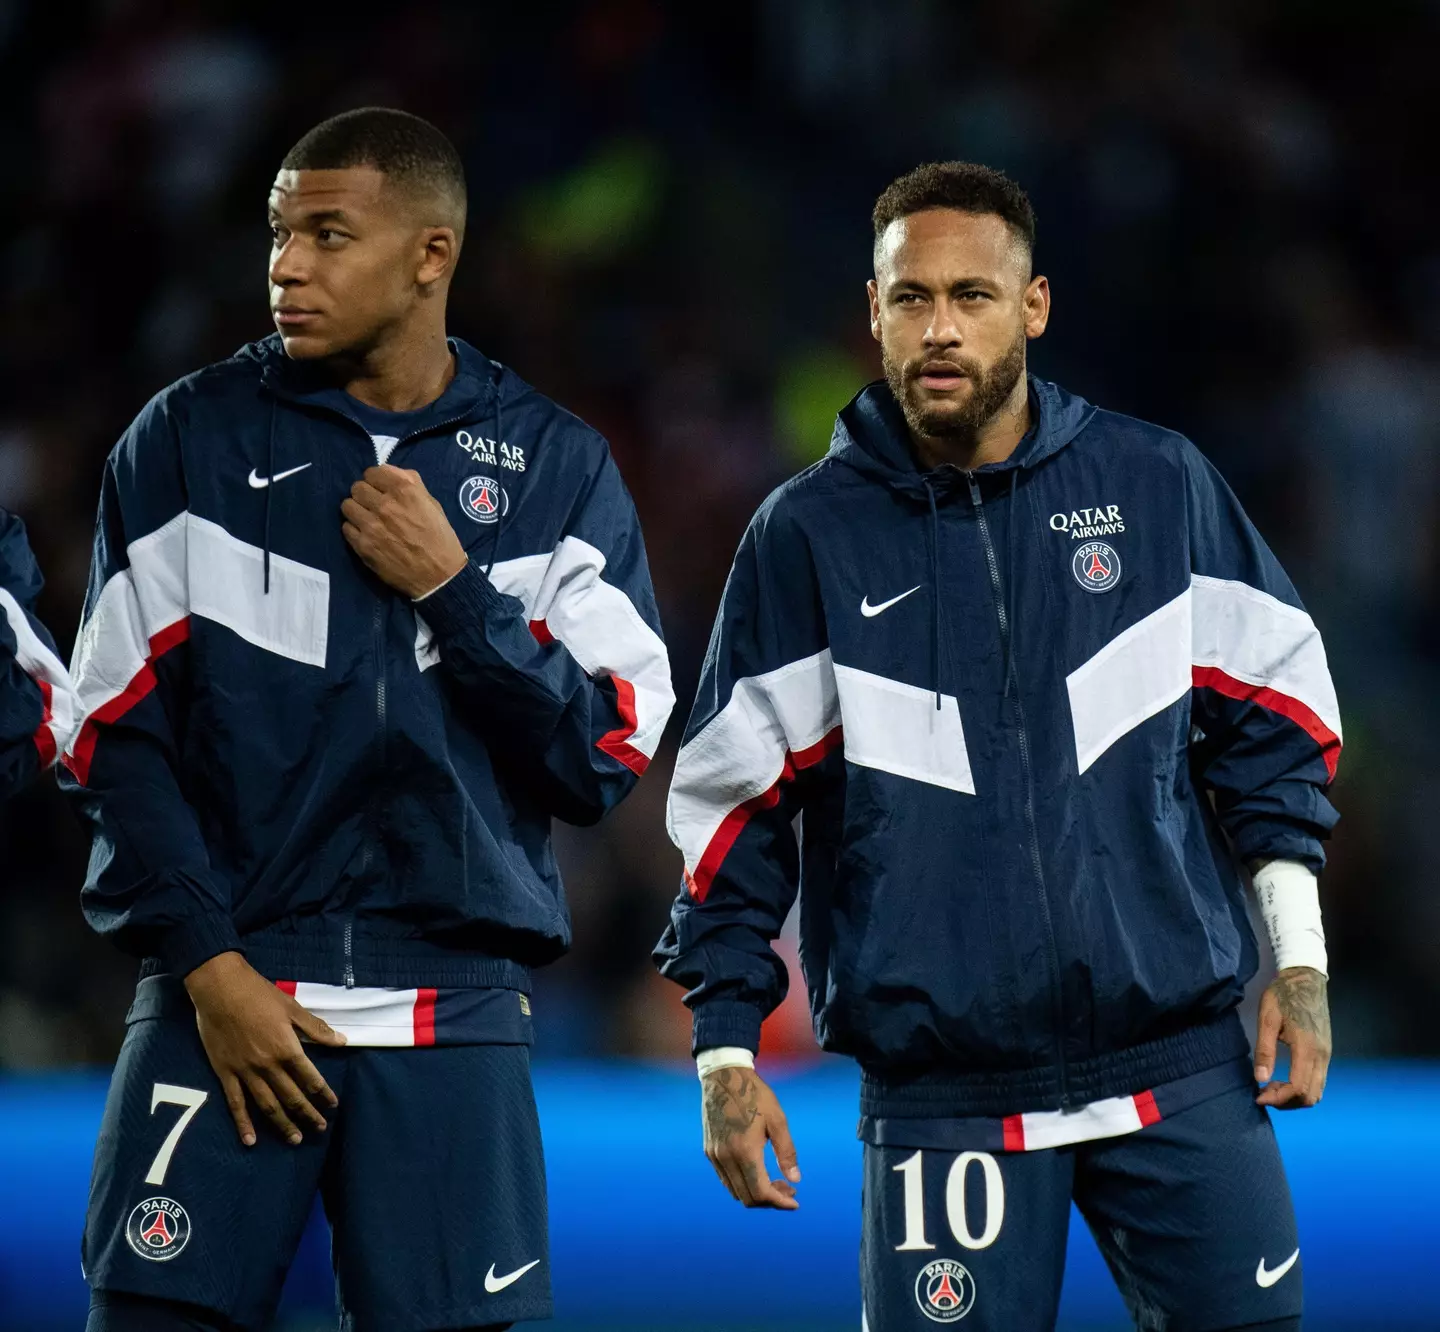 Mbappe's relationship with Neymar is said to have deteriorated this season (Image: Alamy)